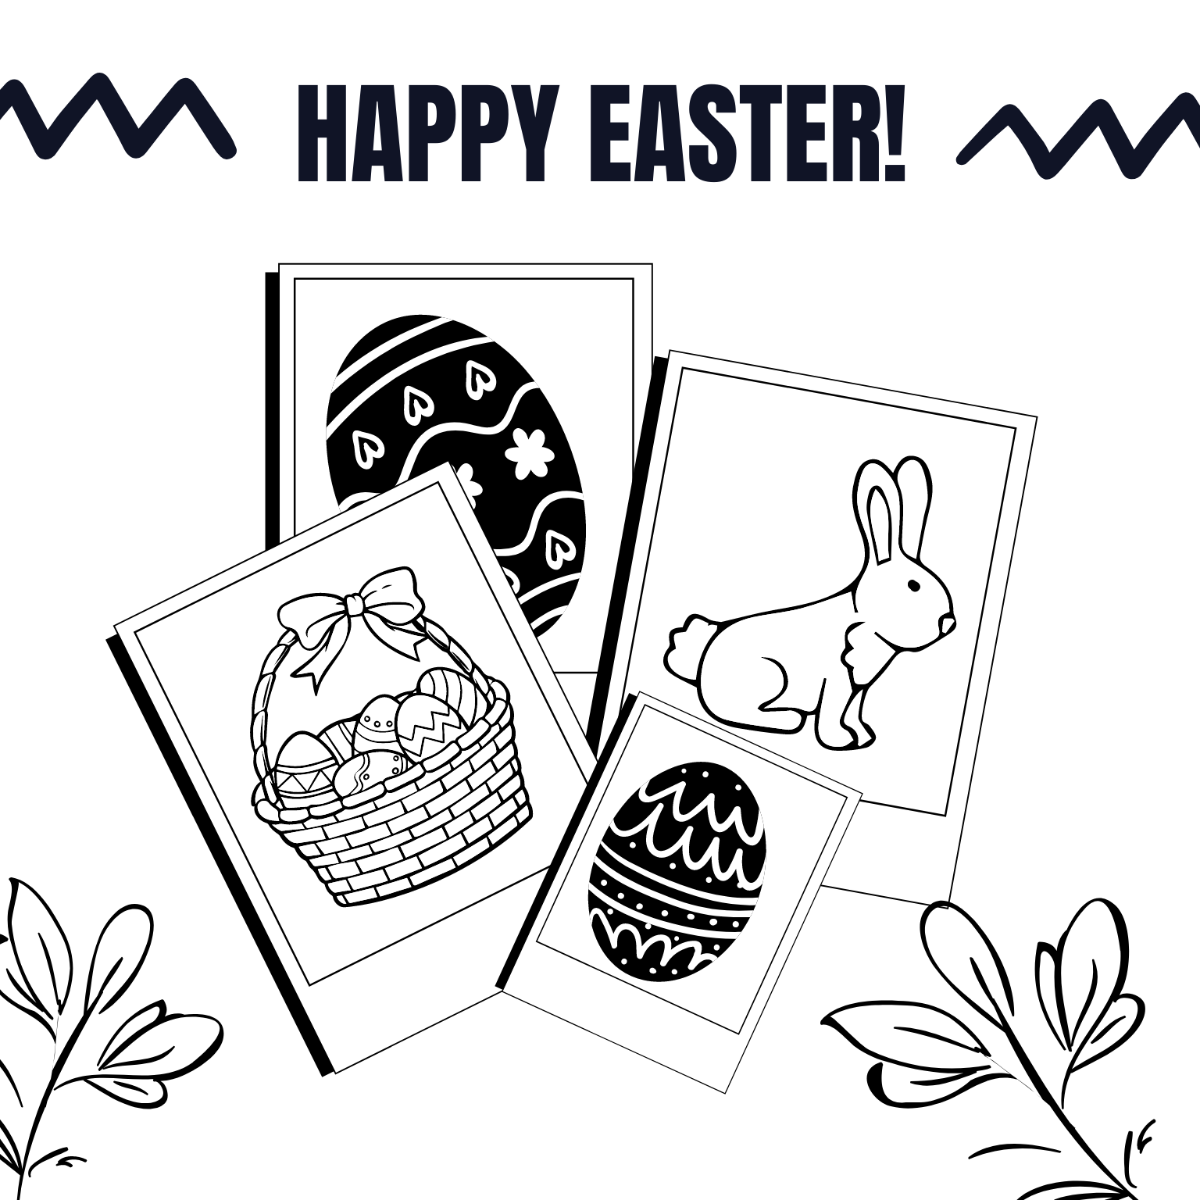 Free Easter Image Drawing Template